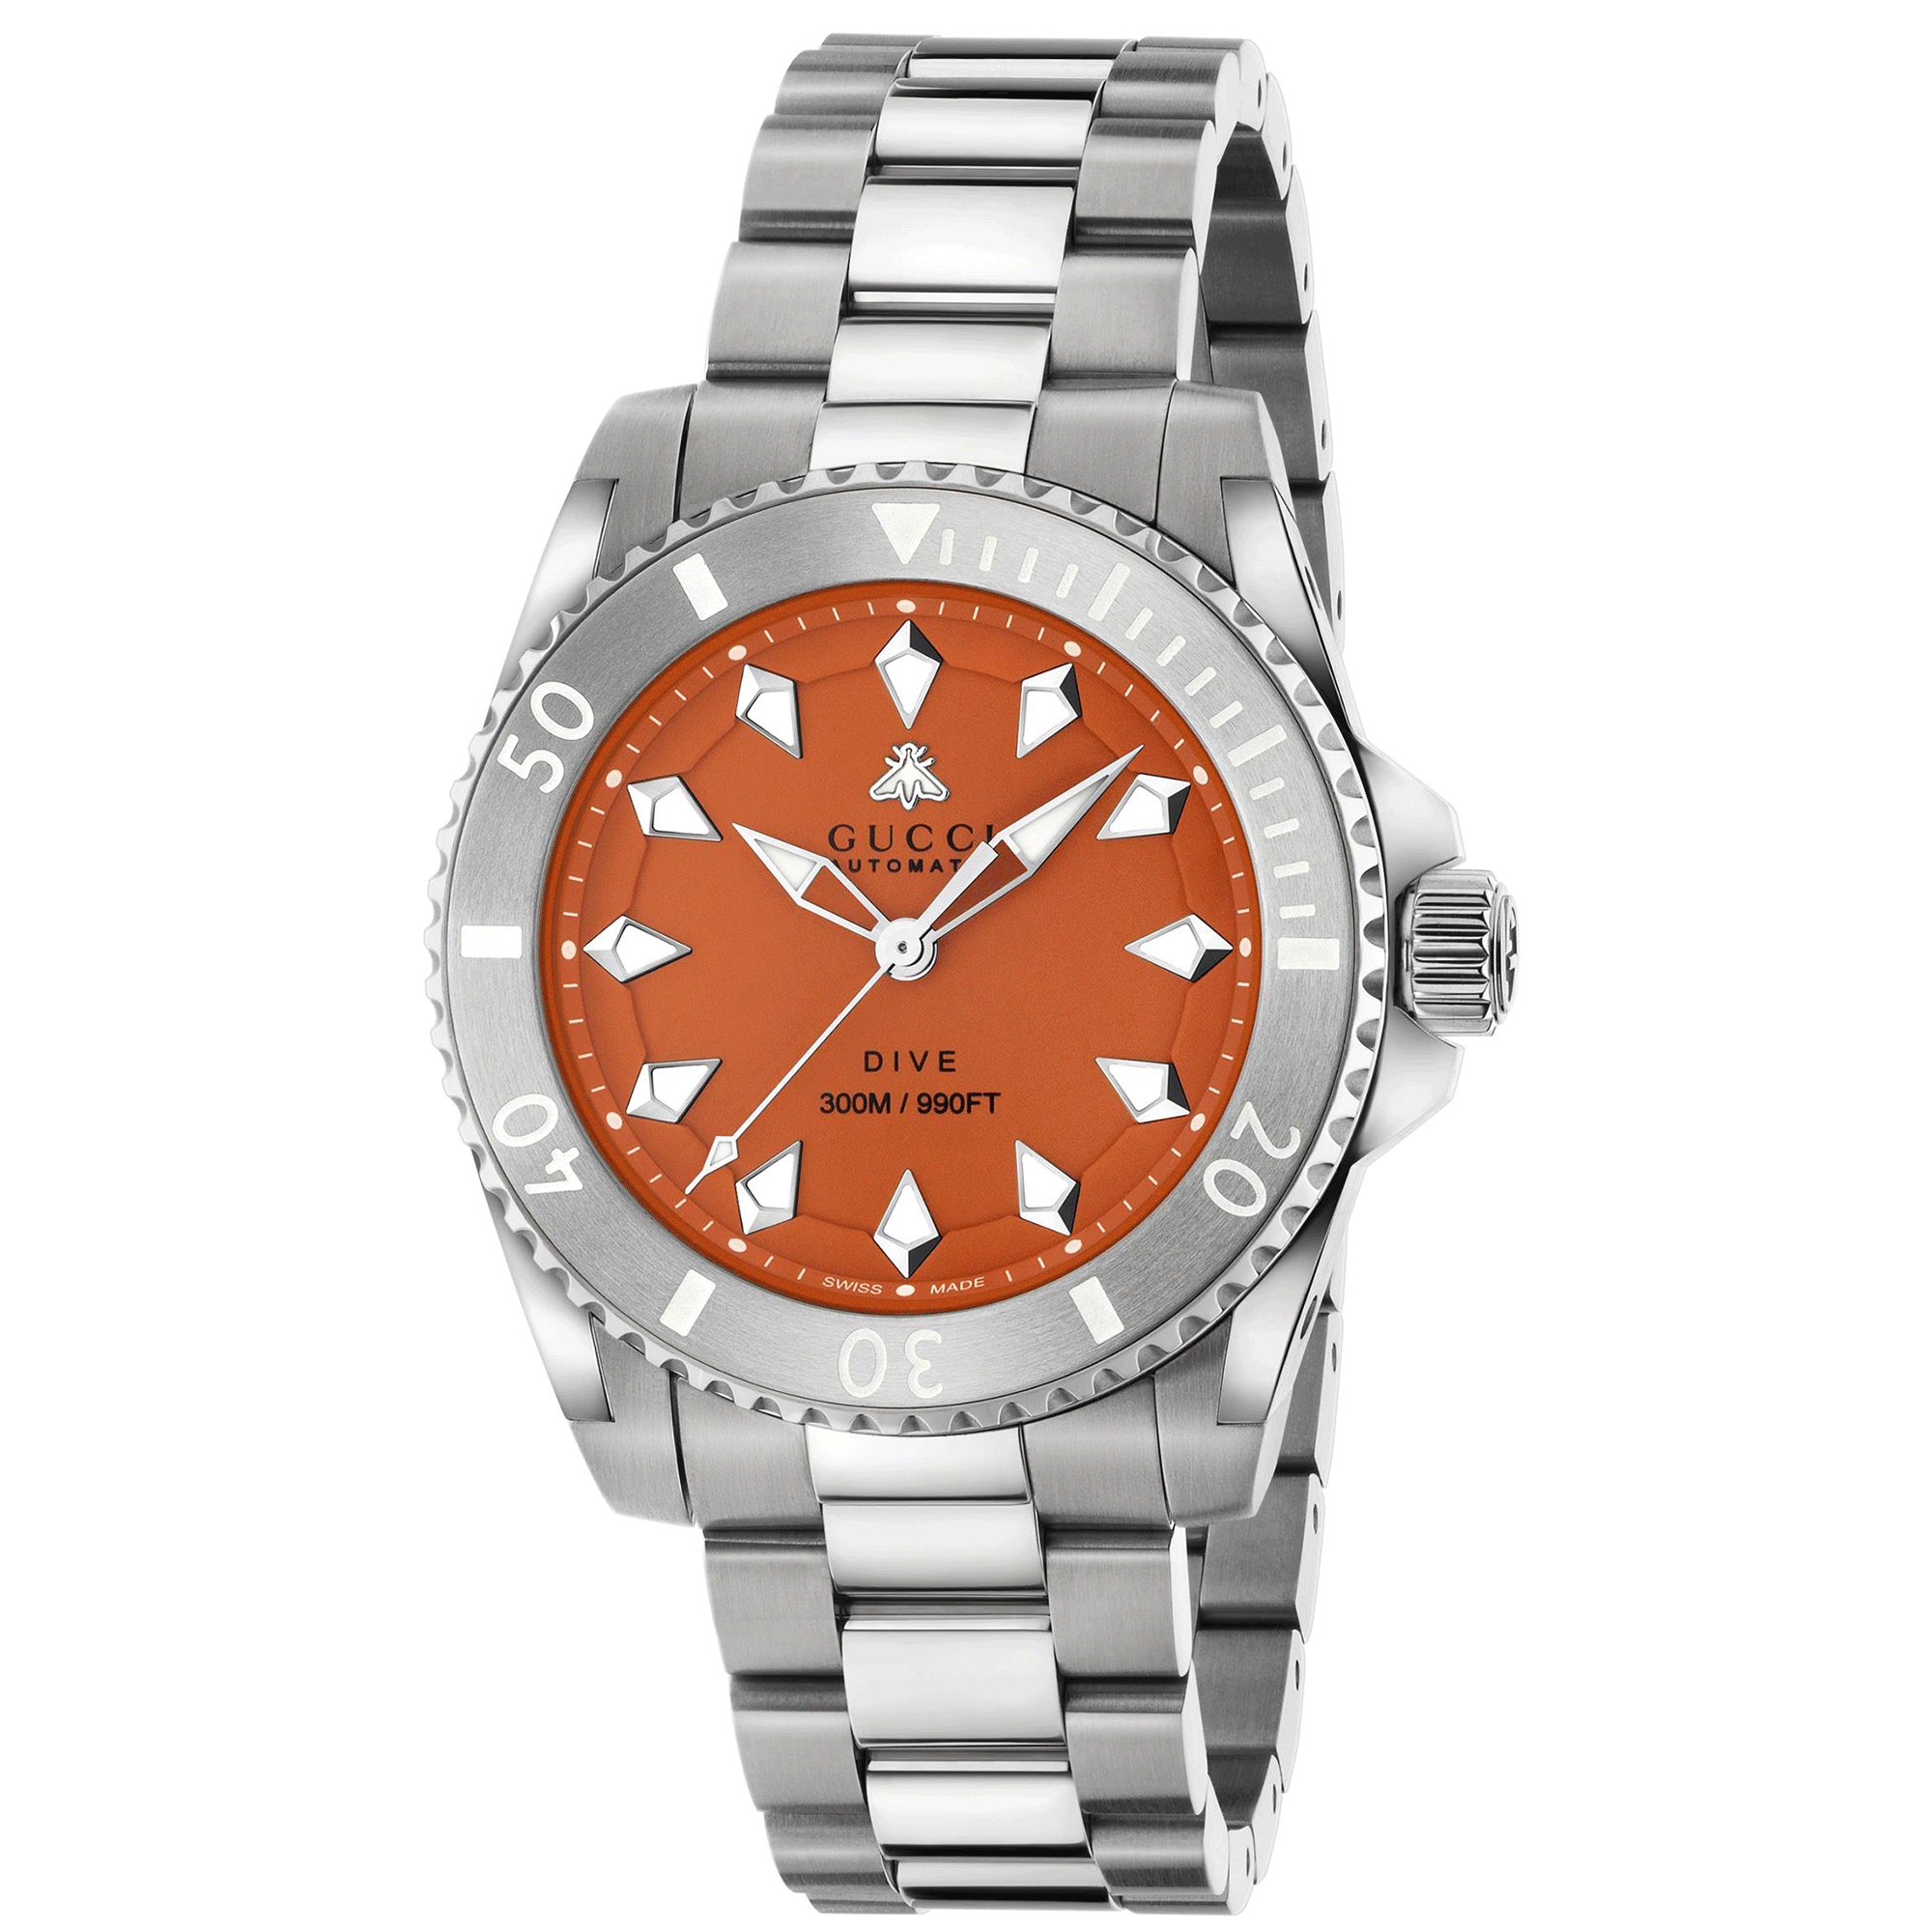 Gucci Dive 40mm Automatic Stainless Steel Watch With A Orange Dial & Ceramic Bezel